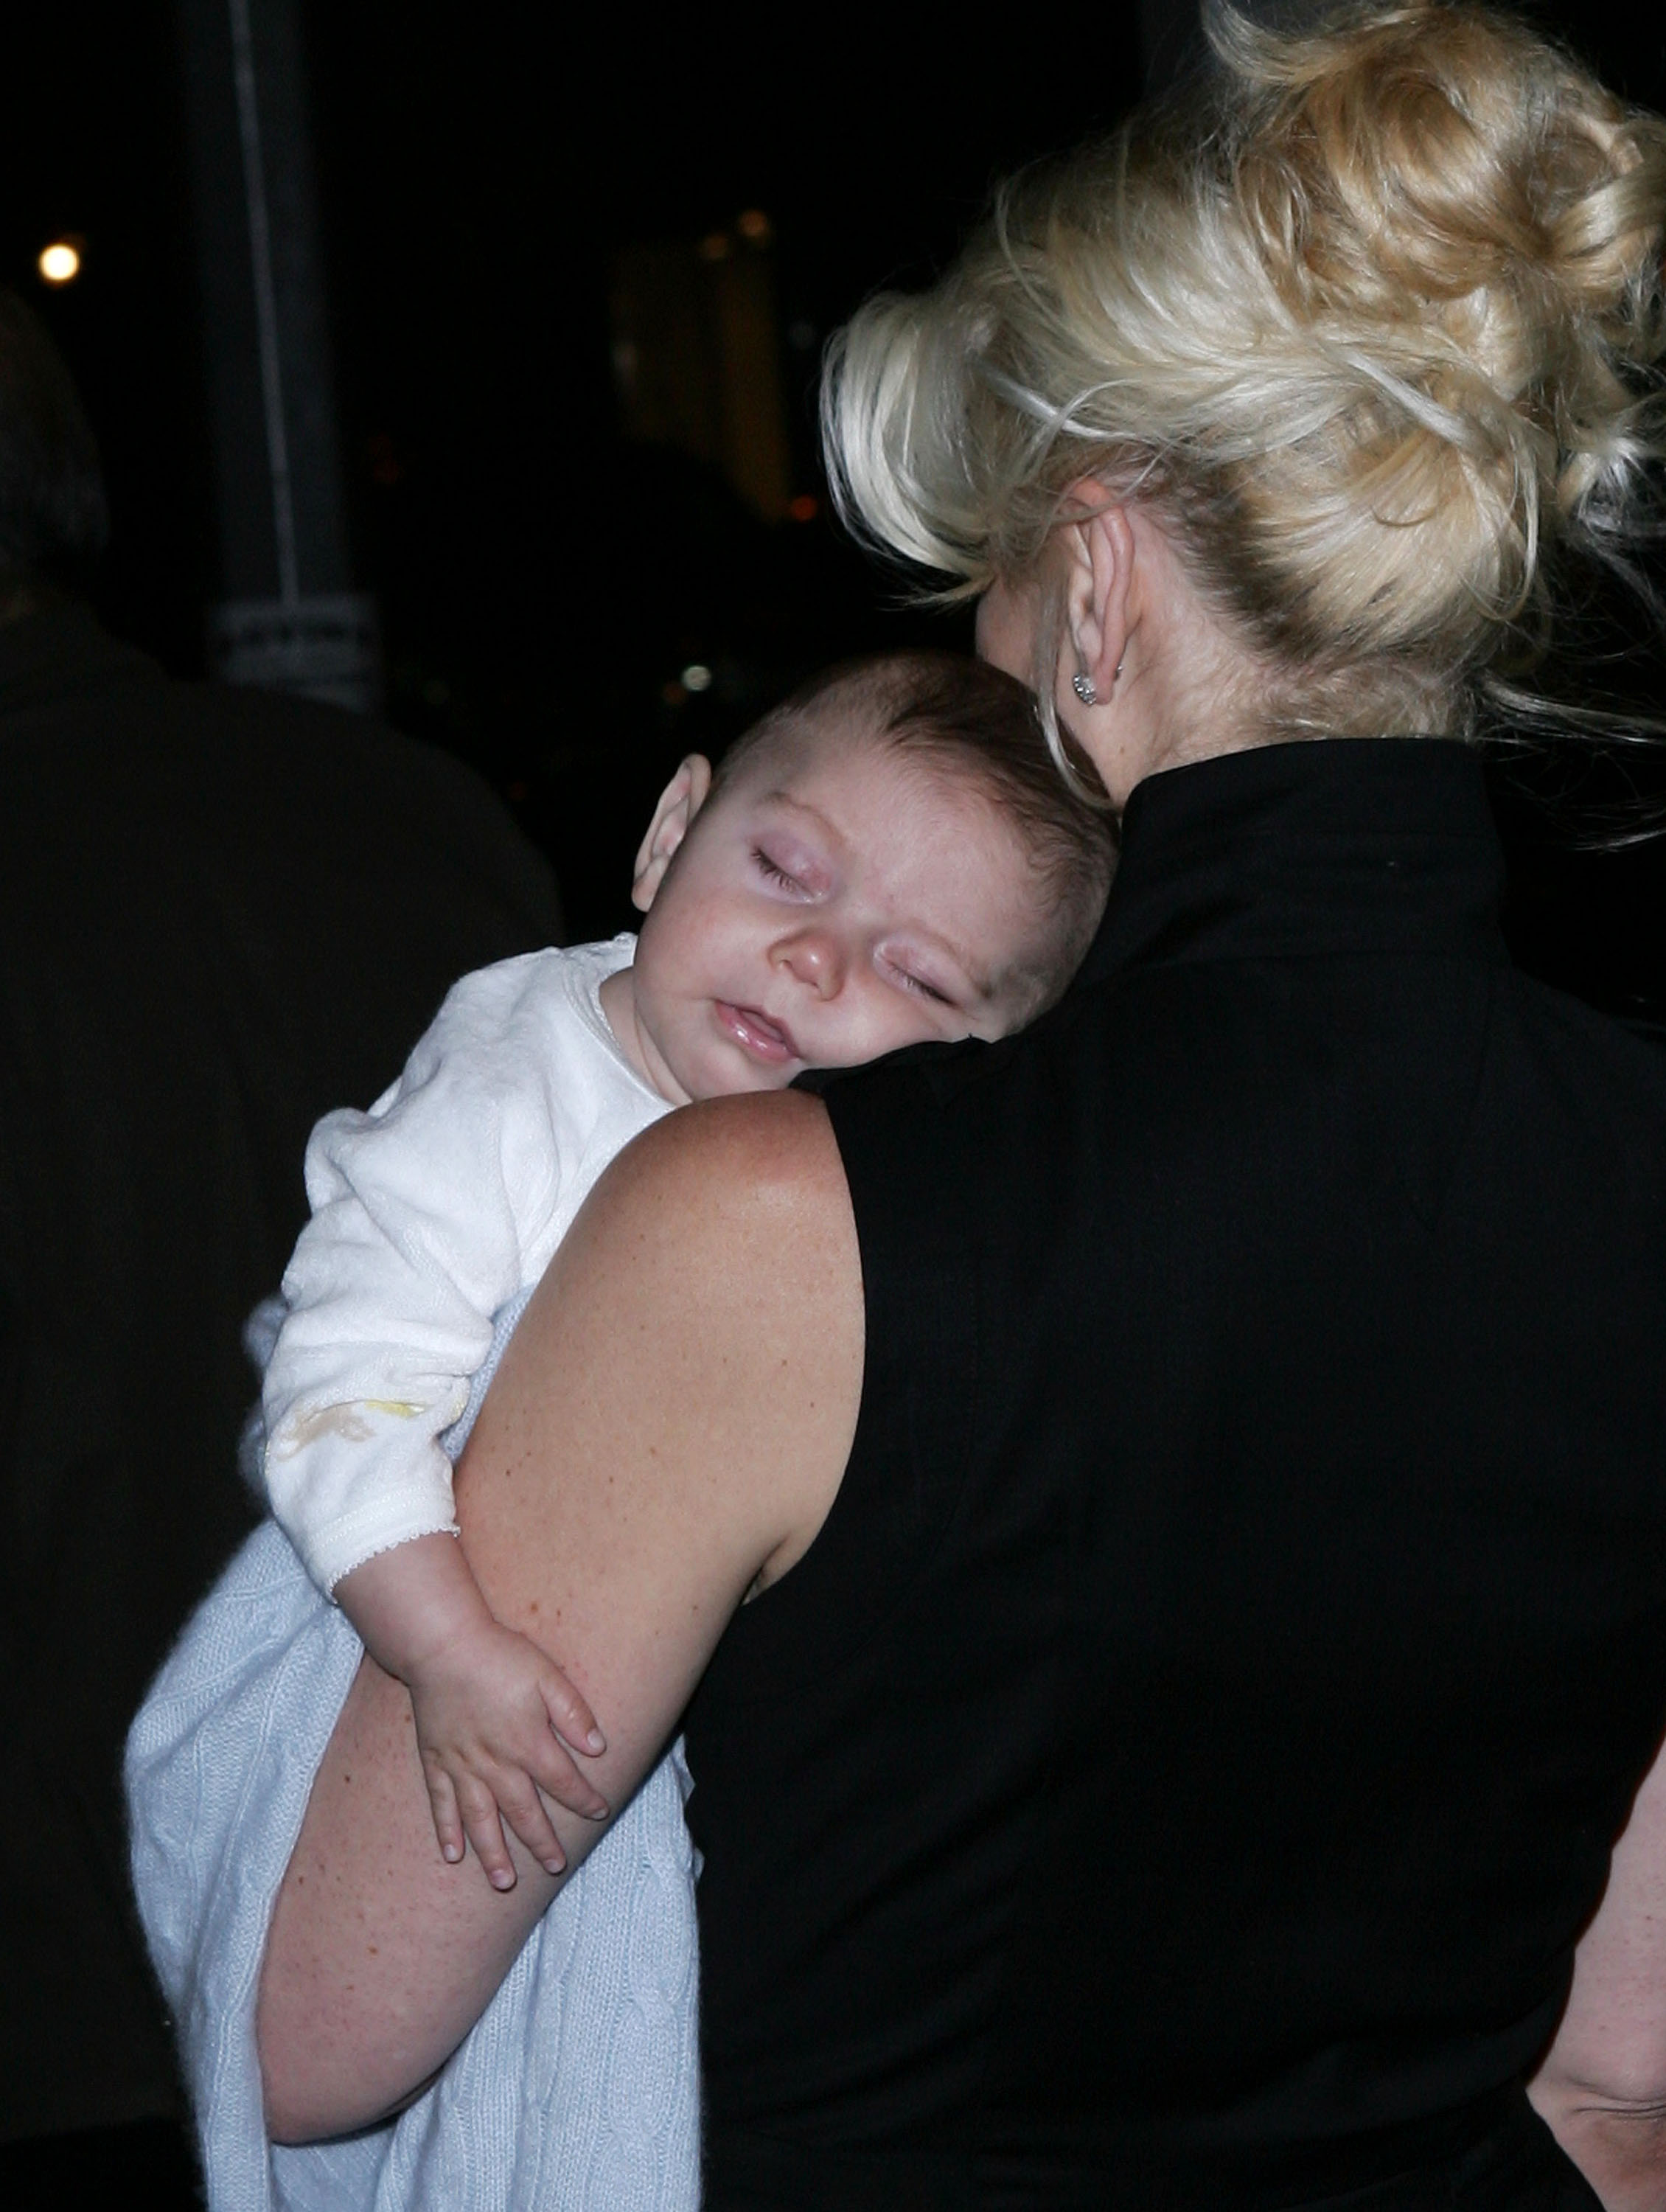 Gwen Stefani seen with her son Kingston Rossdale on September 12, 2006 in New York City | Source: Getty Images